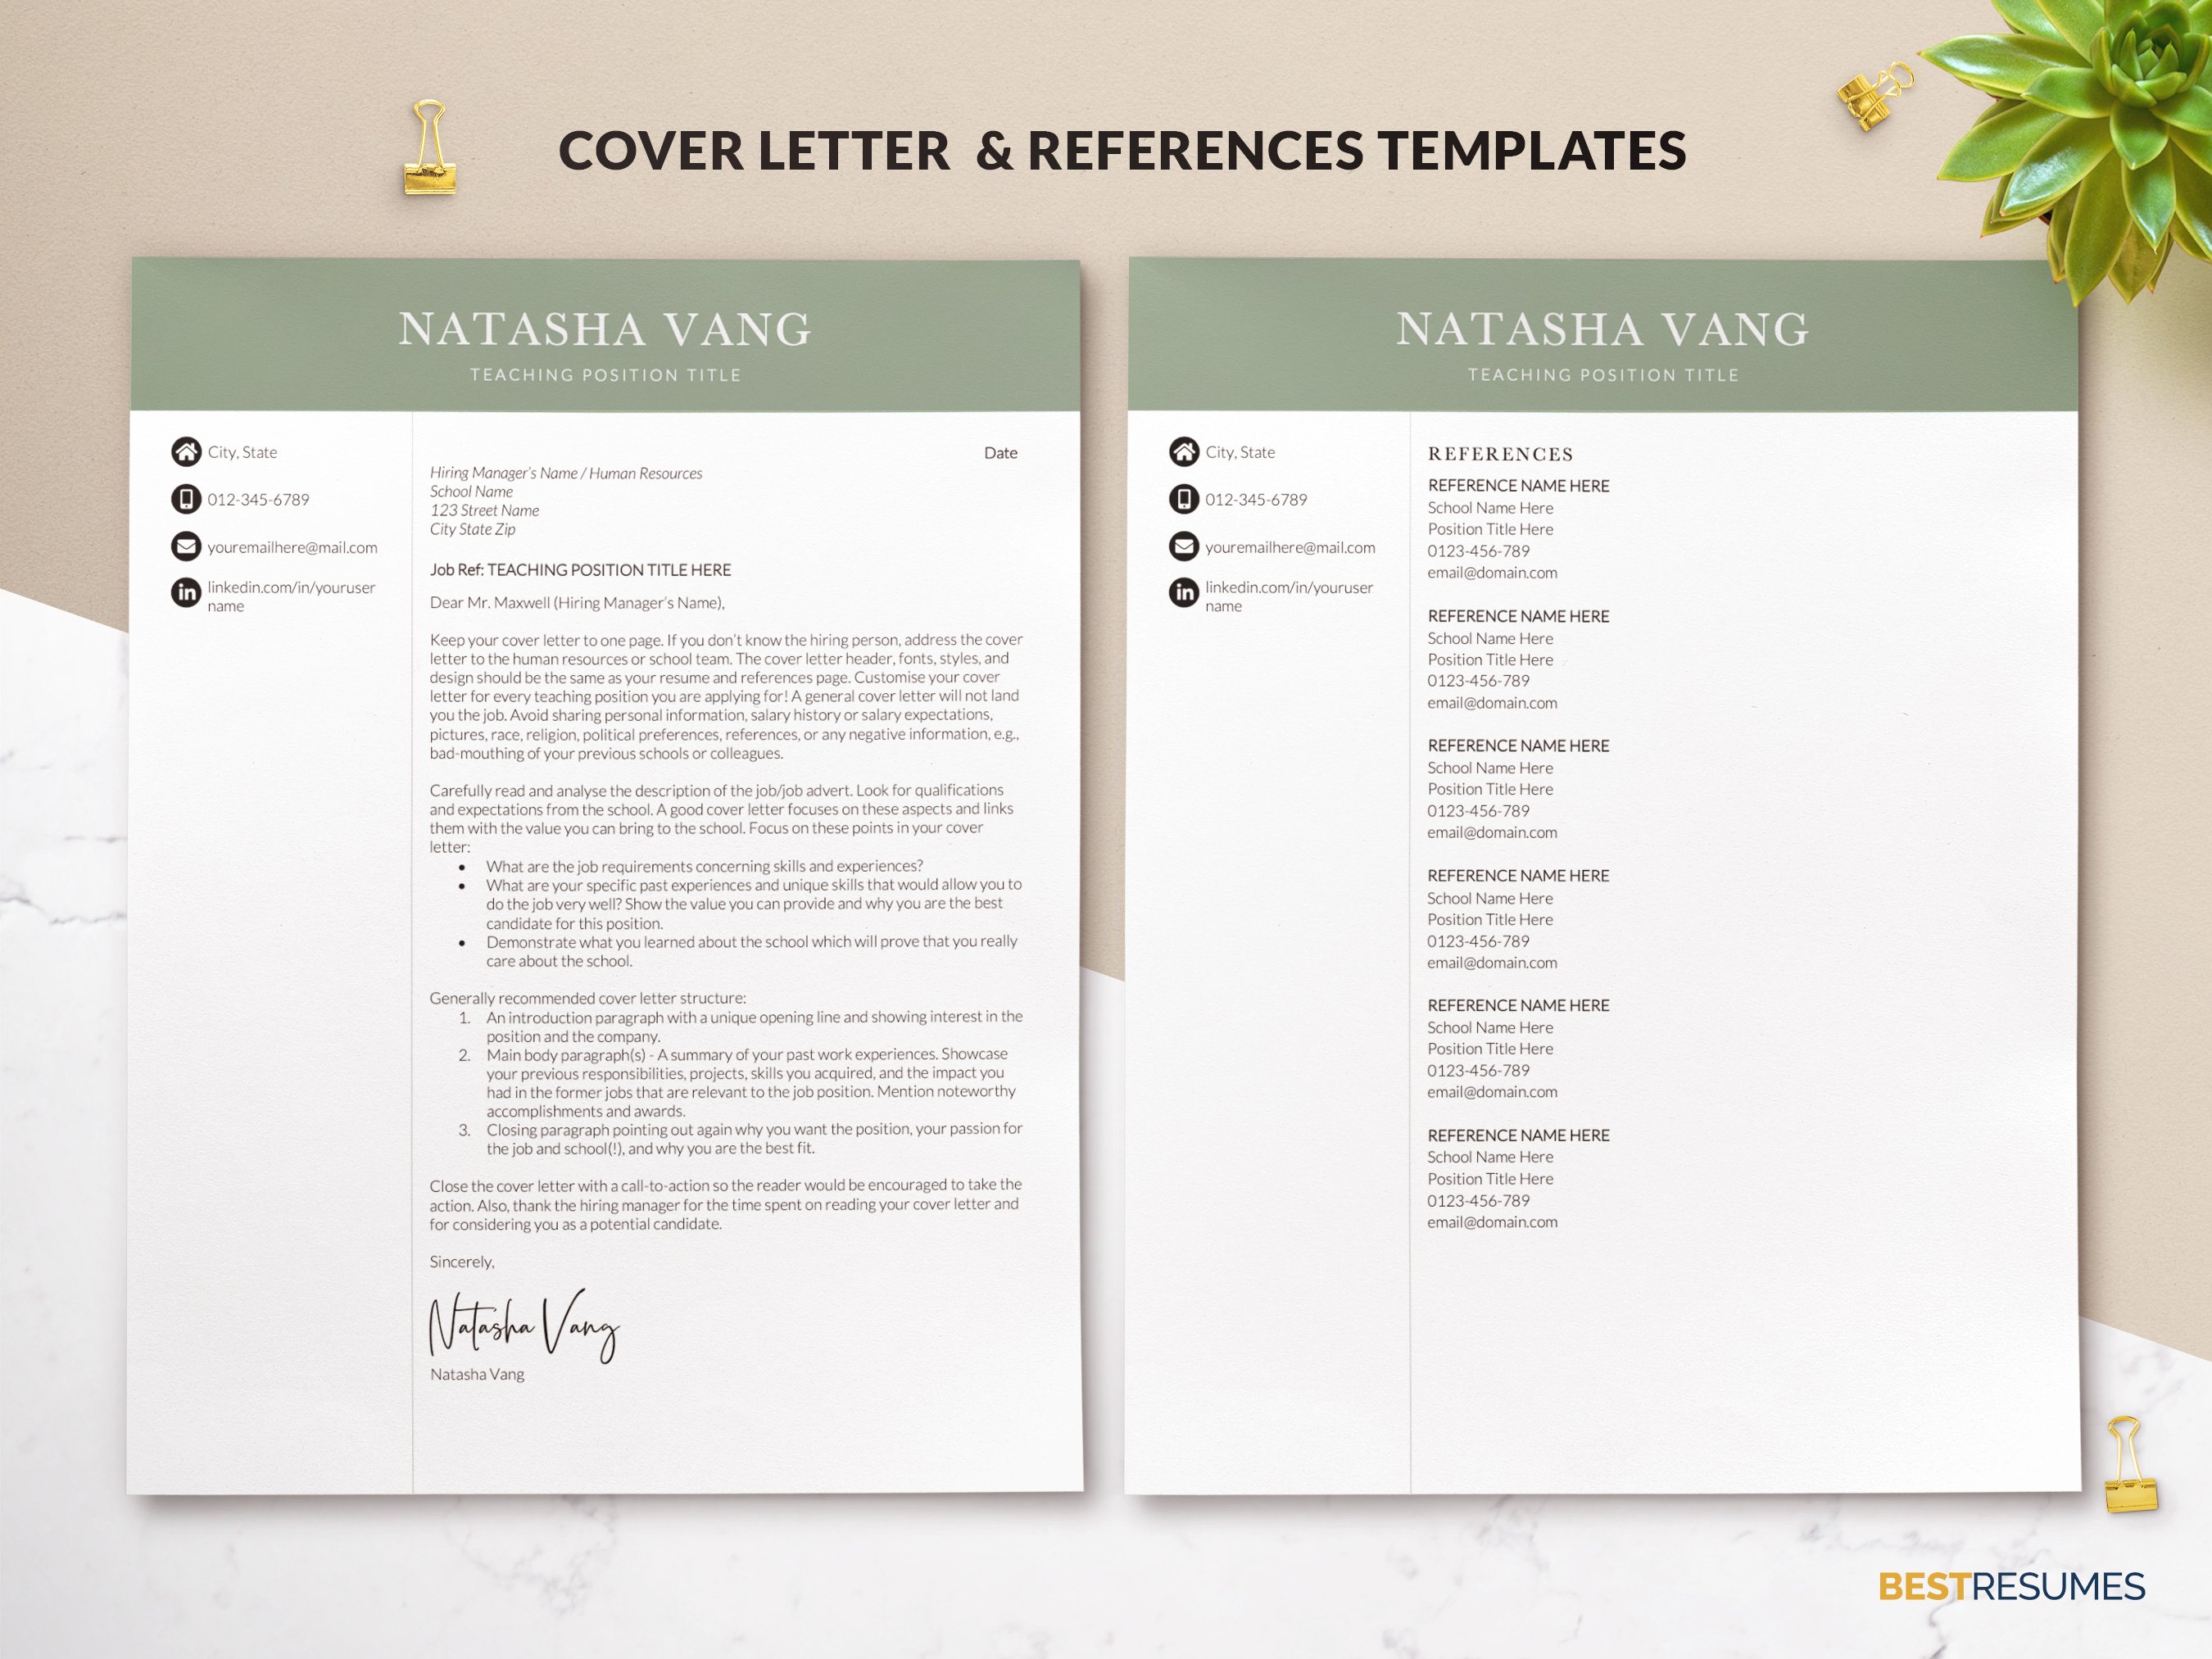 professional resume for teachers template cover letter references page natasha vang 98